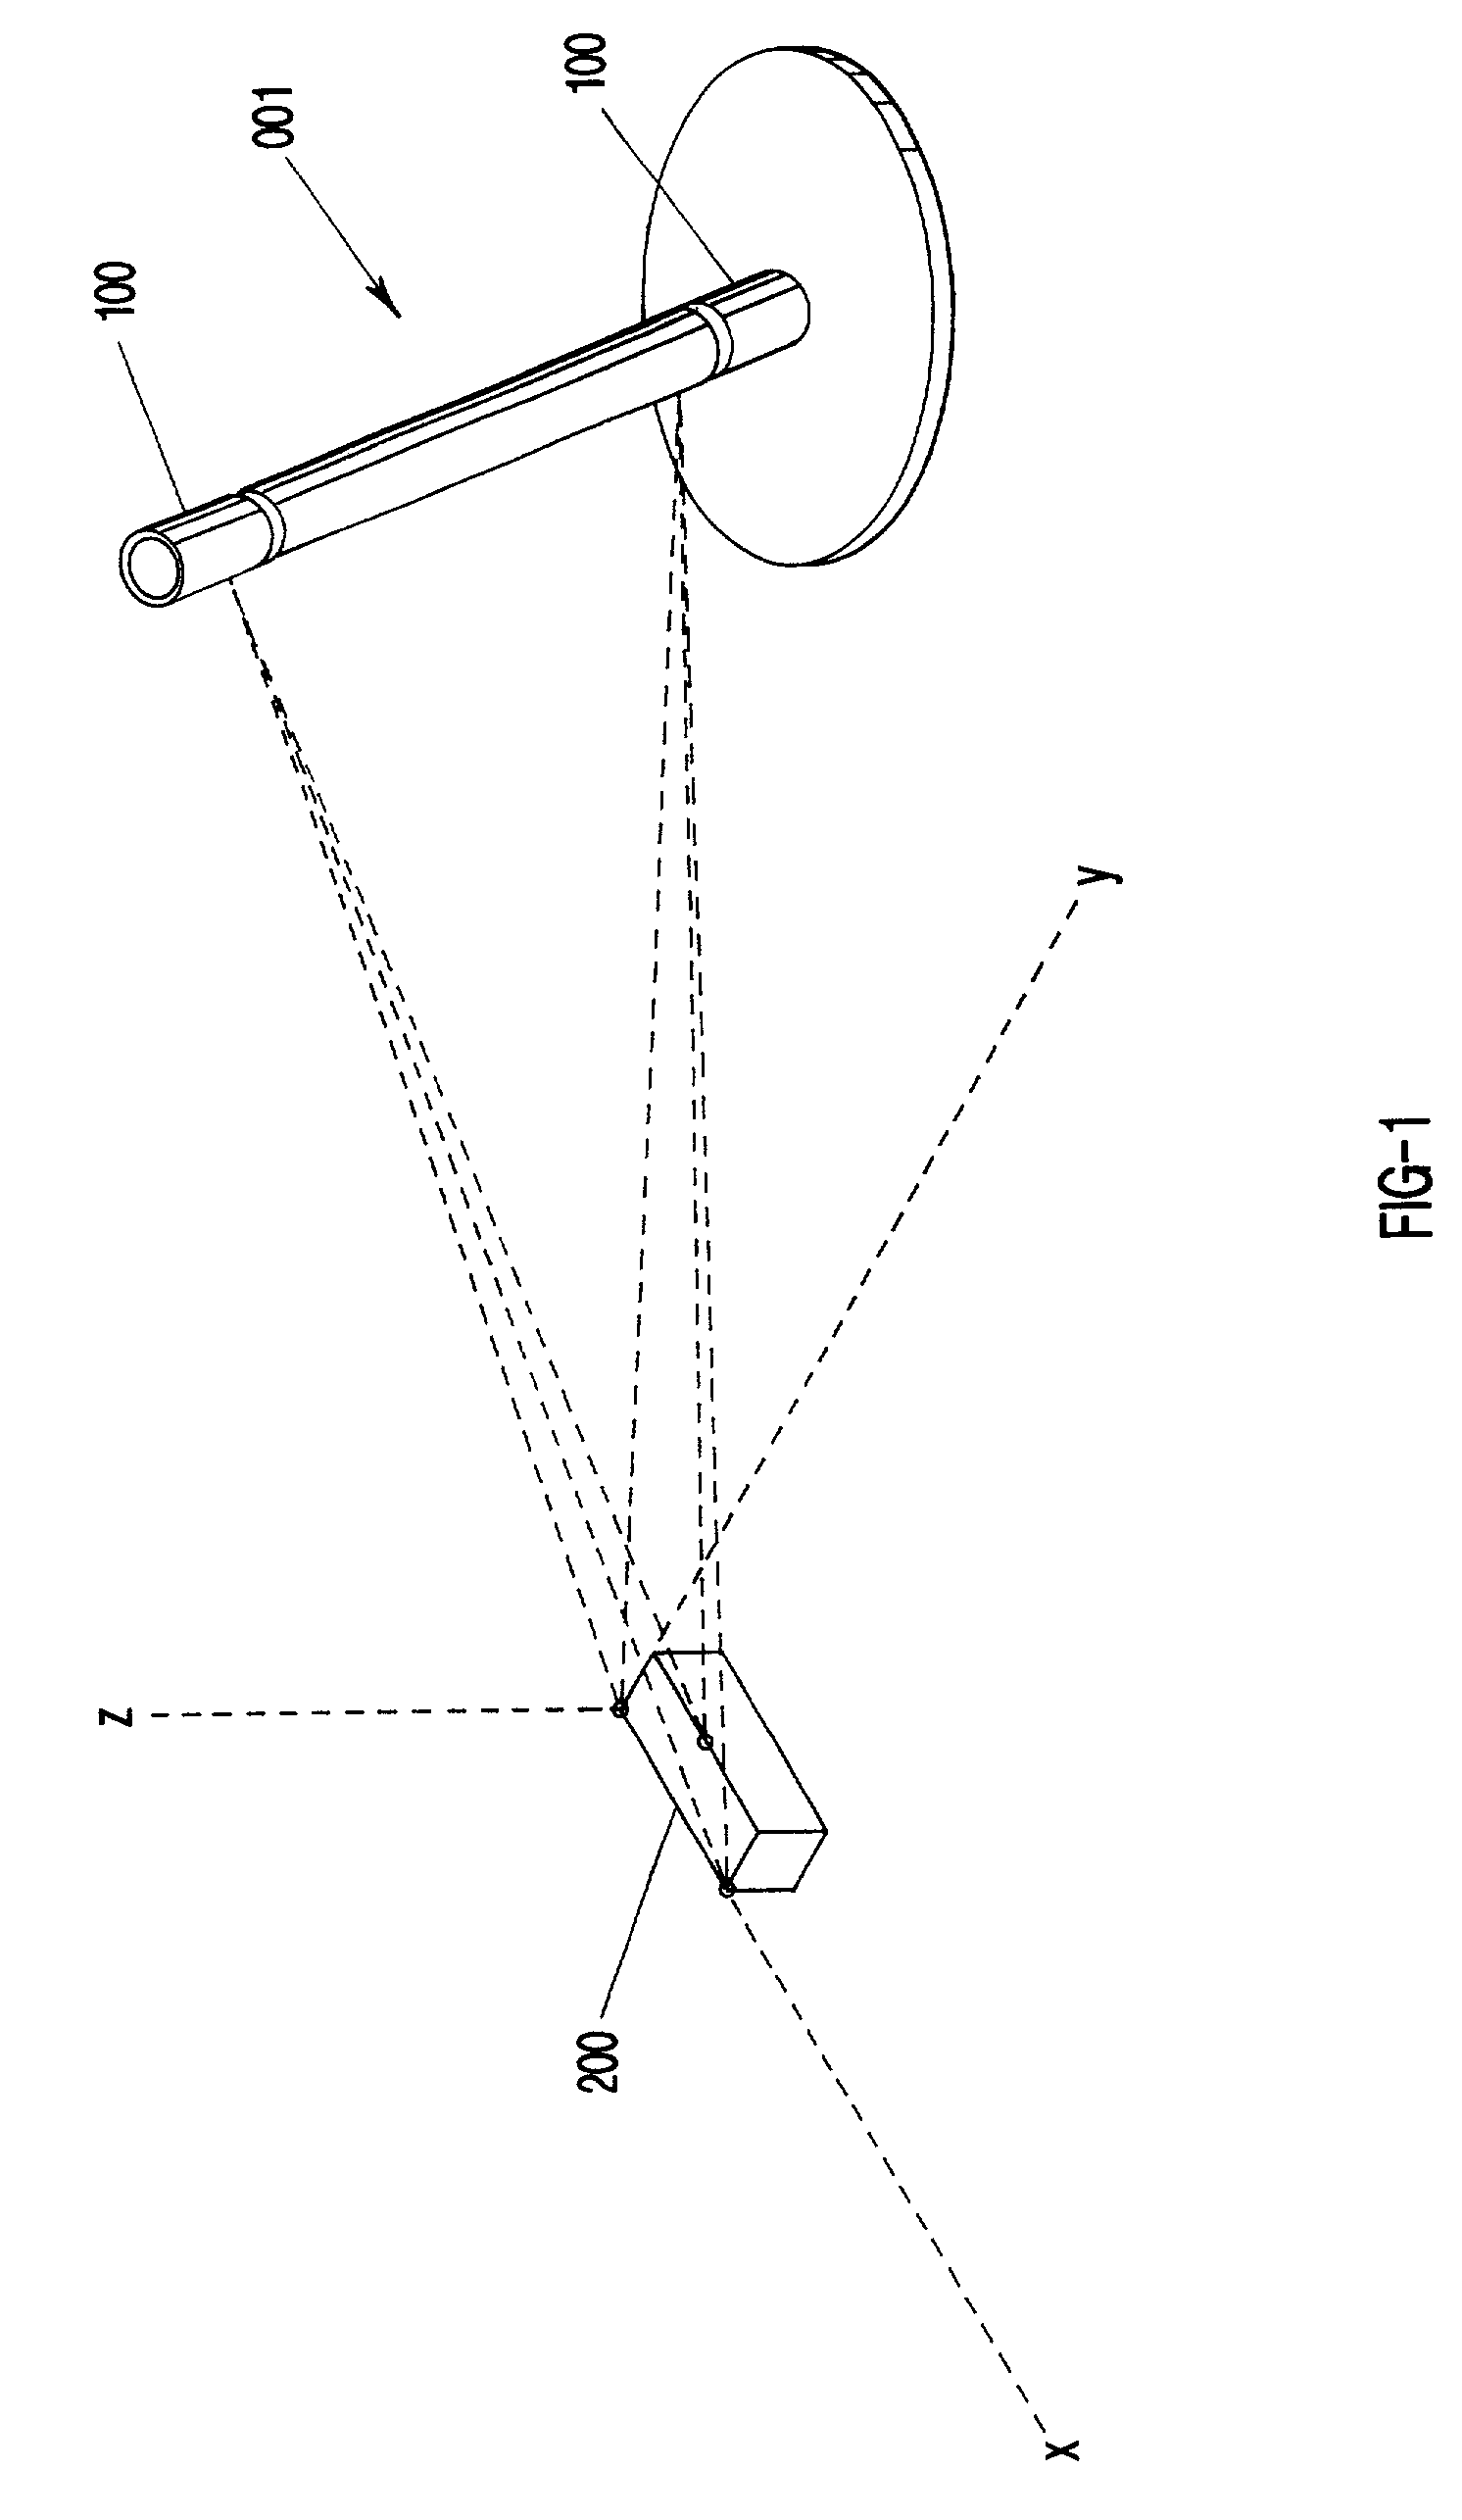 Remote attitude and position indicating system